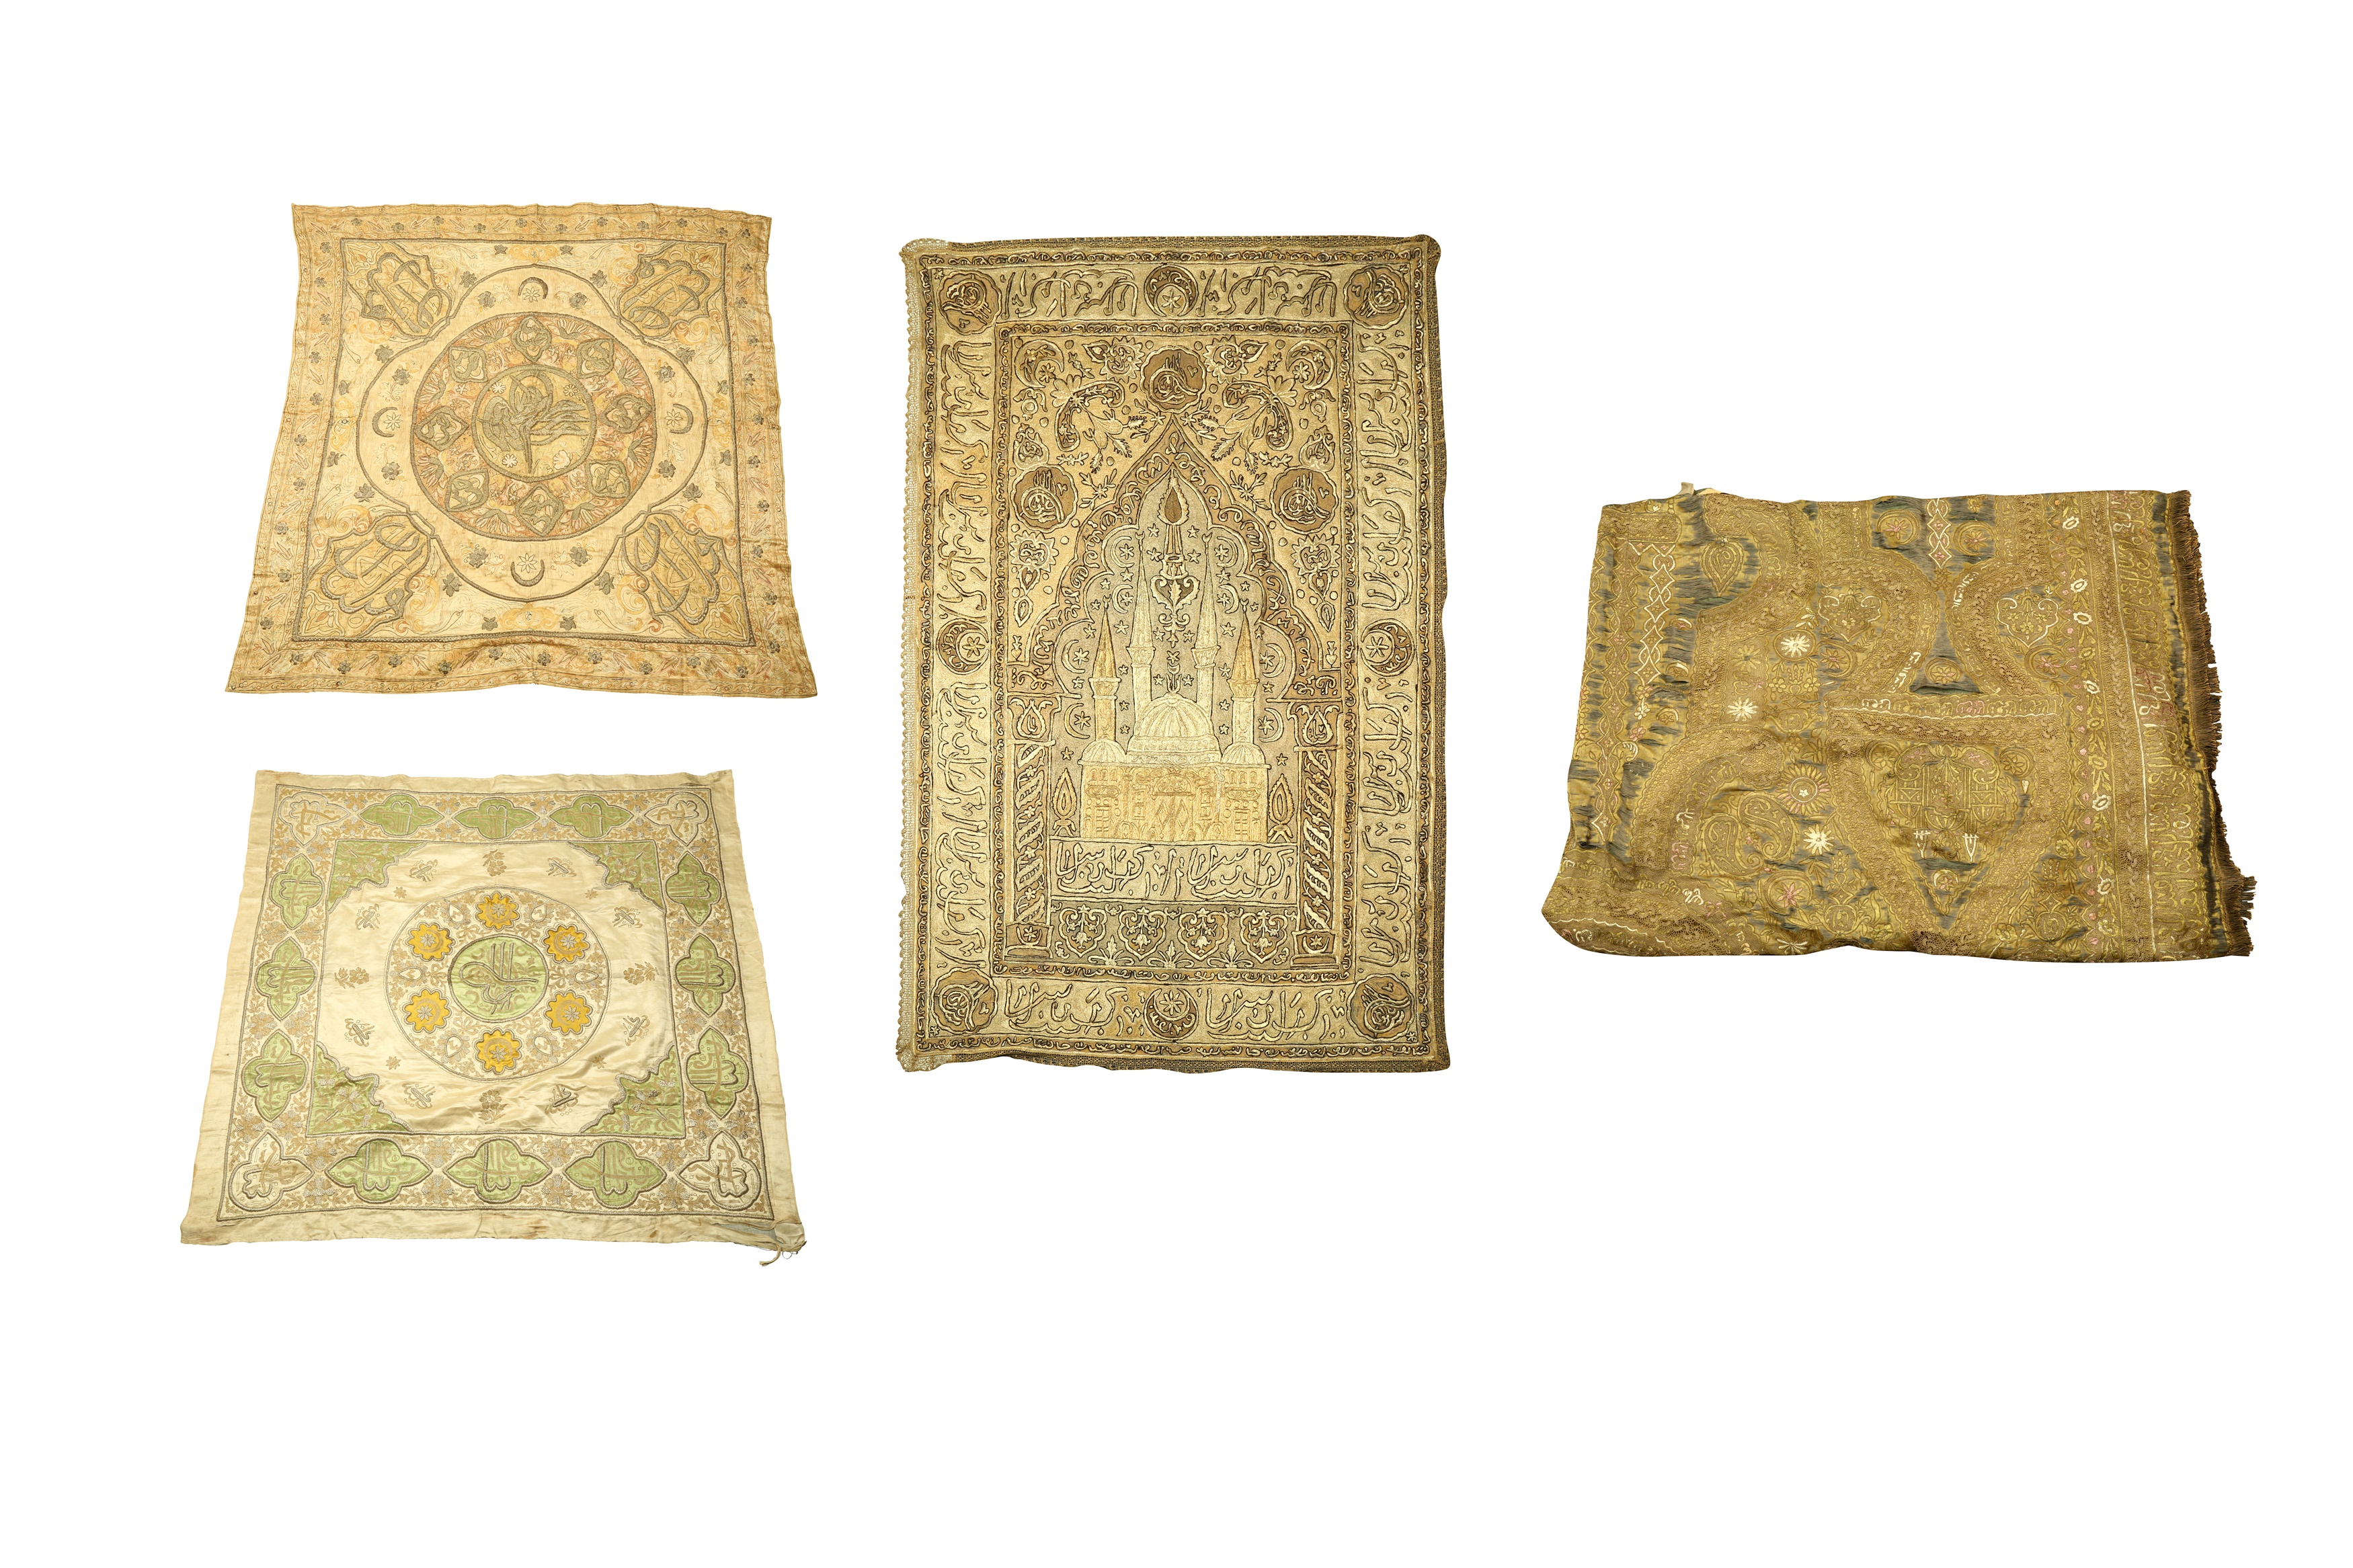 FOUR OTTOMAN METAL THREAD-EMBROIDERED PANELS